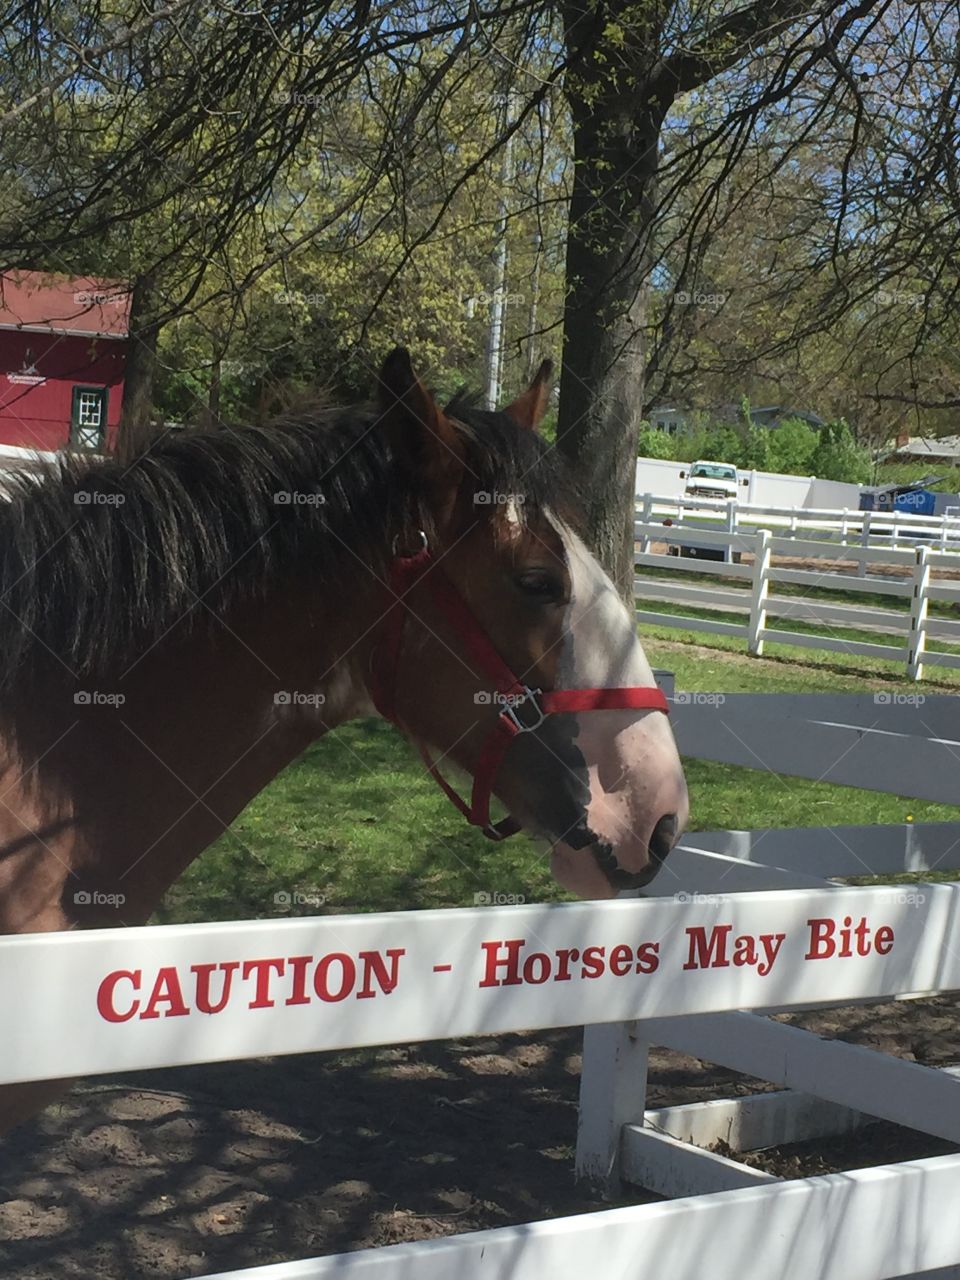 Sign cautioning tourists about horses at Grant's Farm, home of Budweiser Clydesdales 